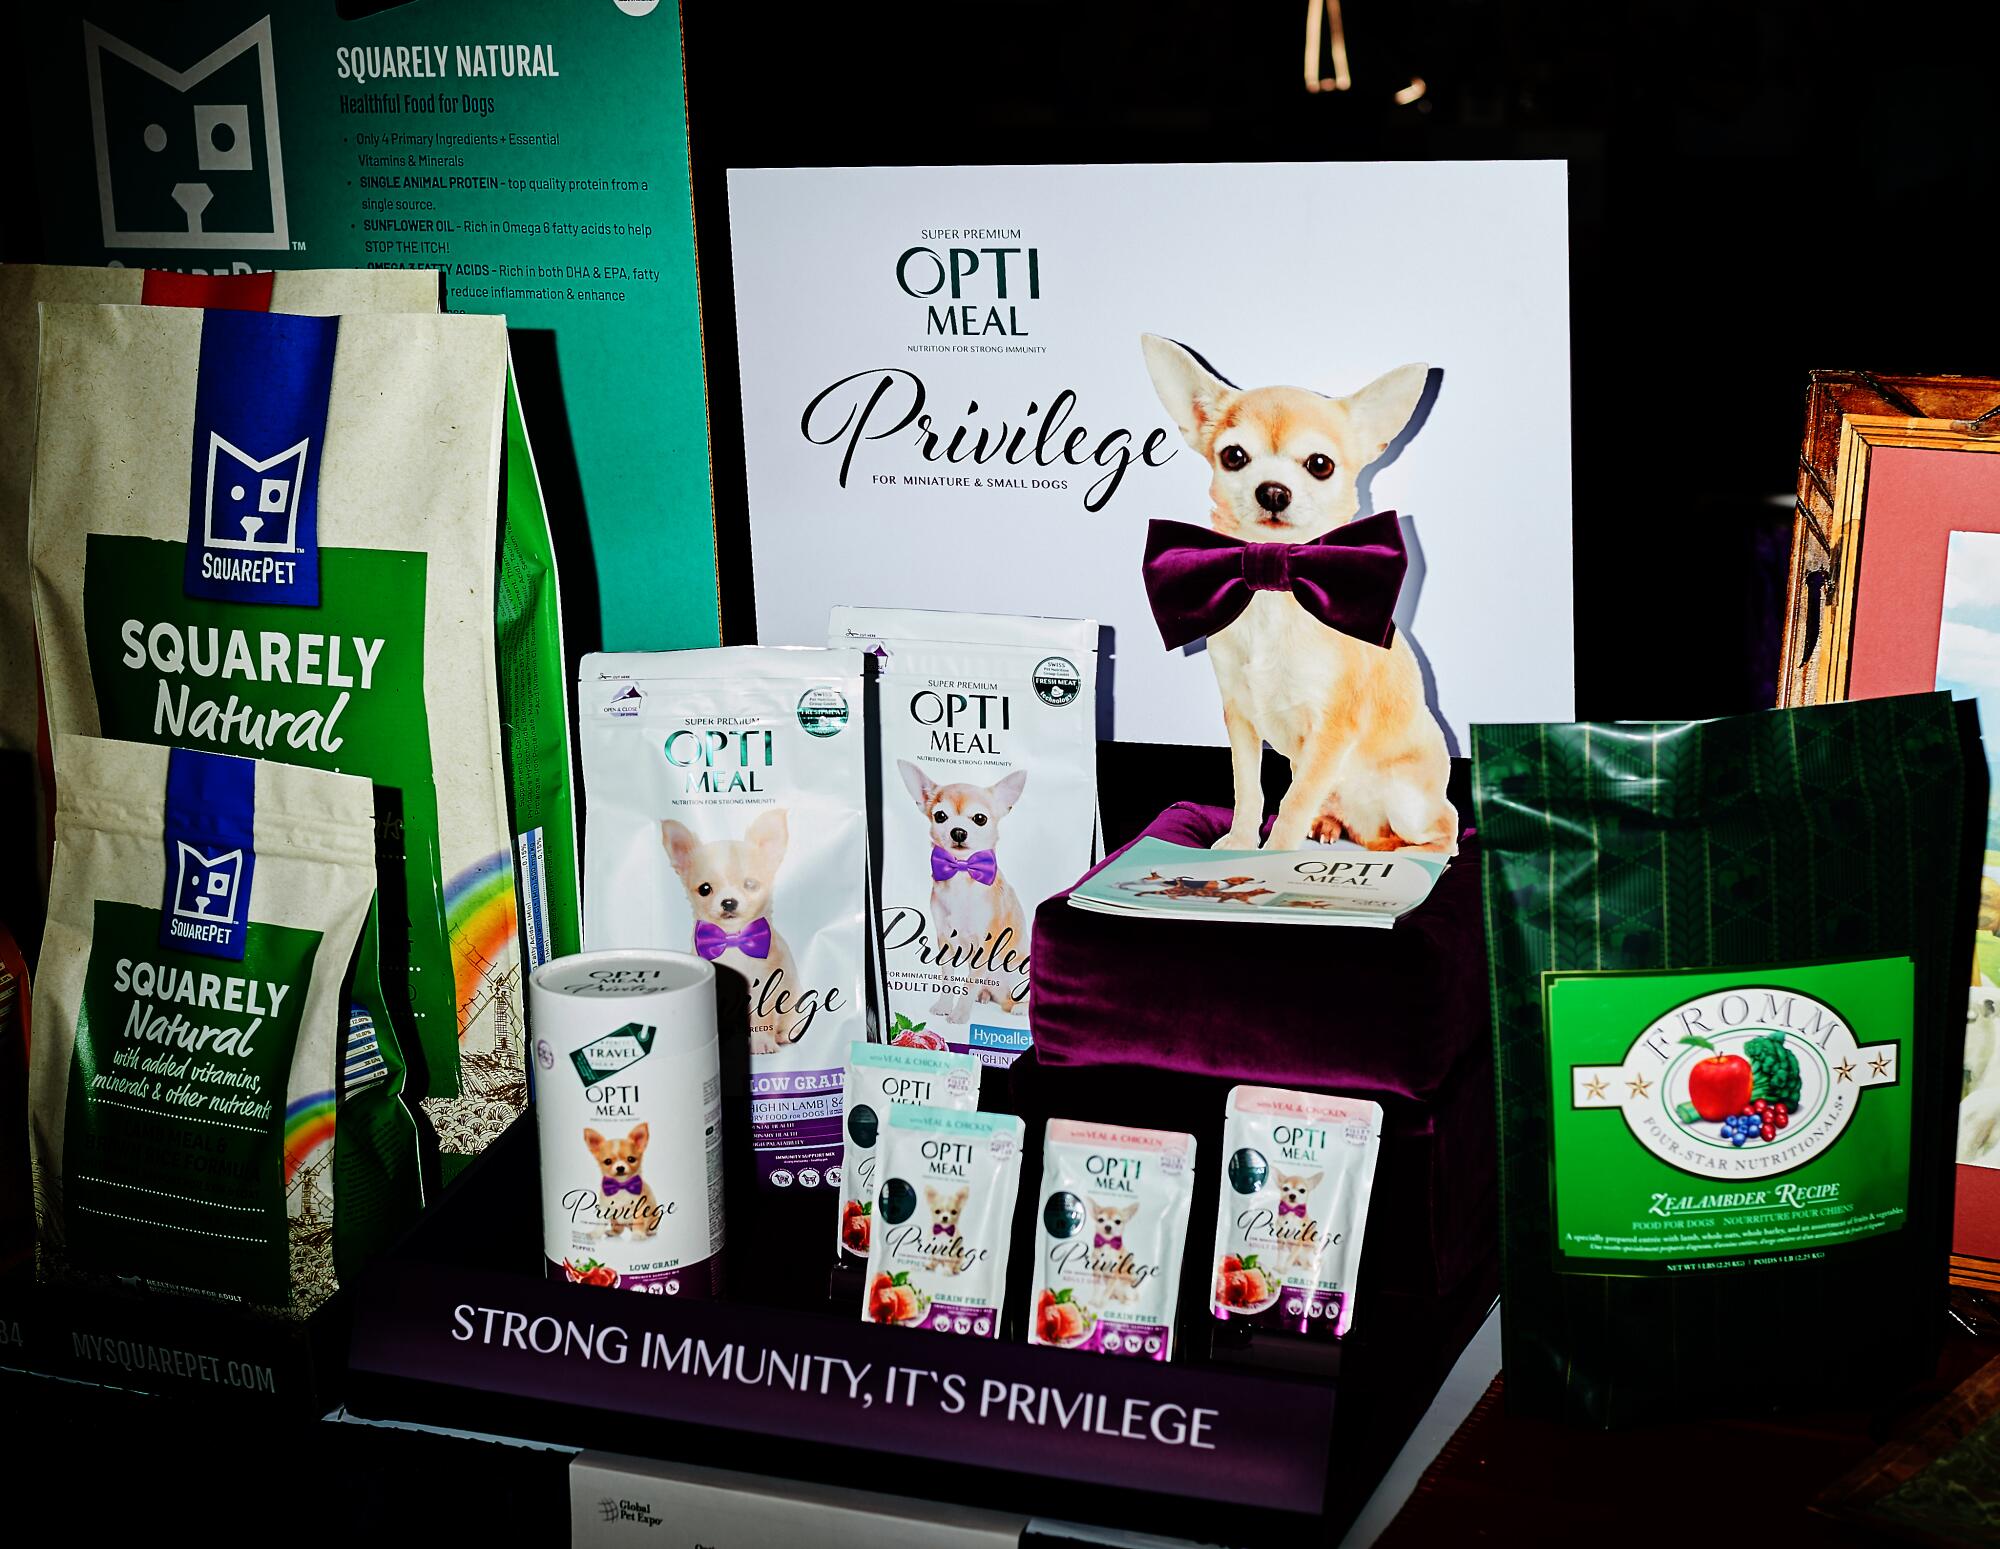 Opti Meal's line of Privilege dog food, among many offerings for the pampered pooch.